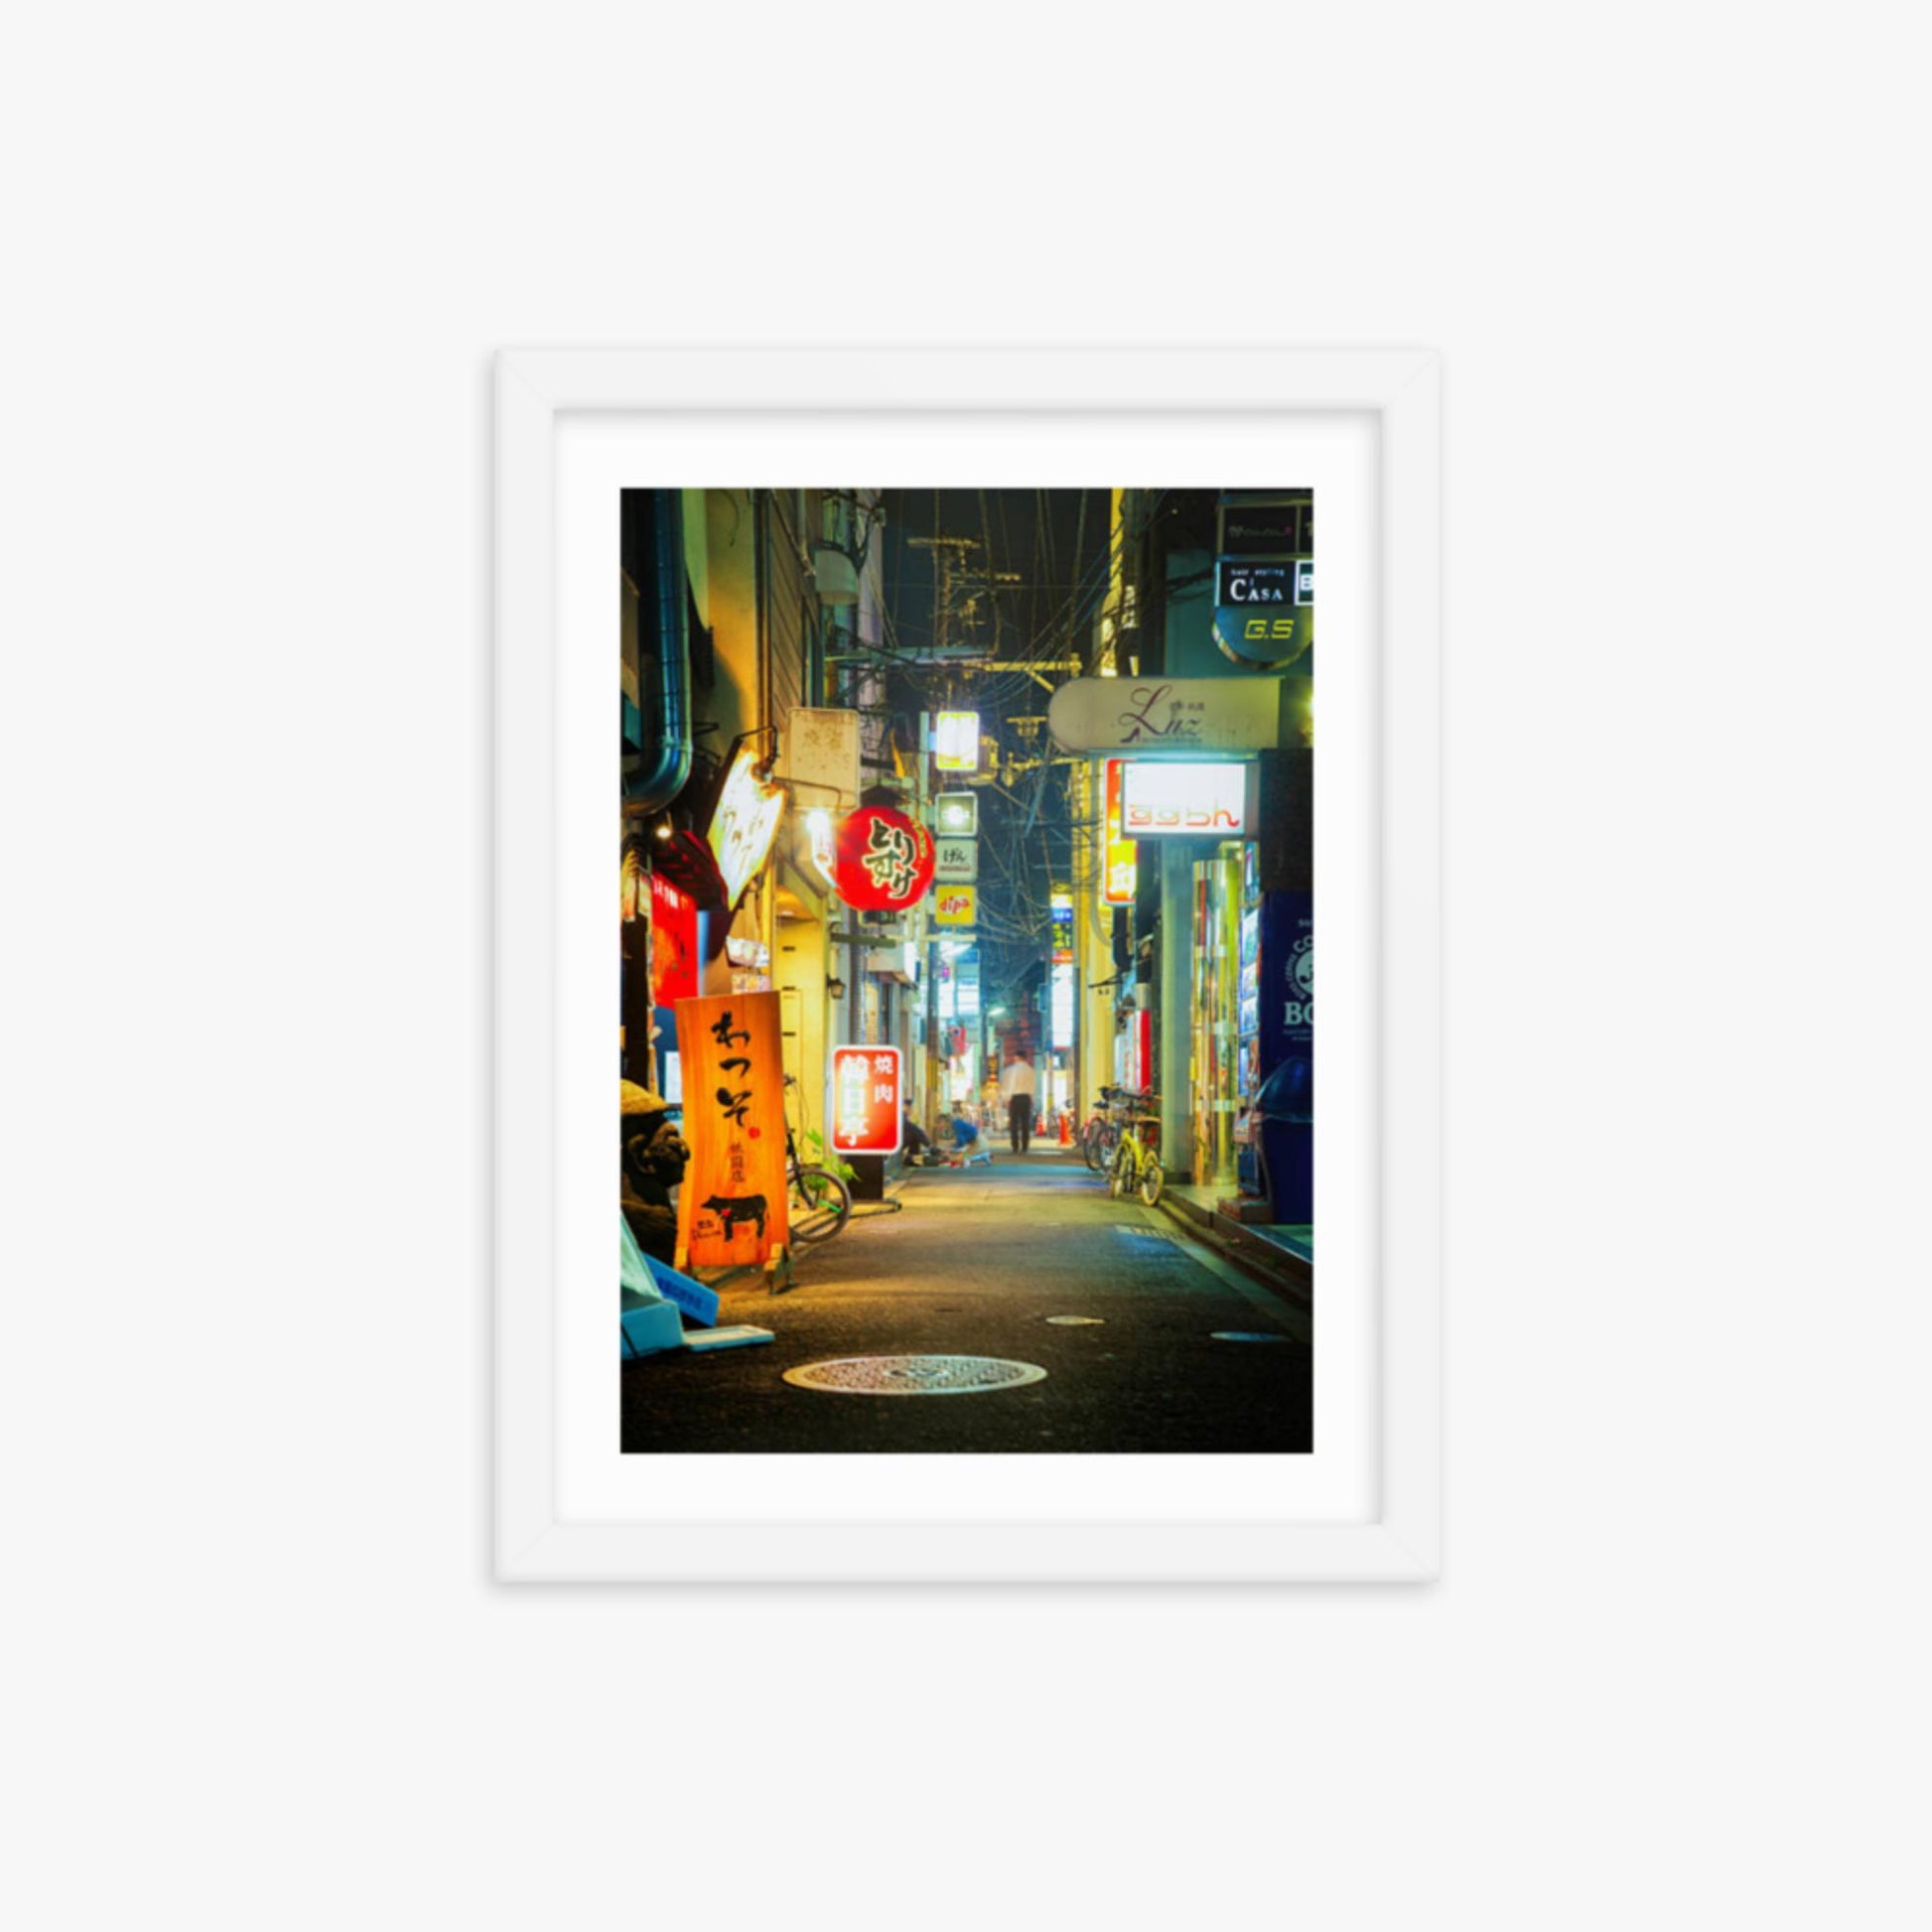 Kyoto, Japan backstreet at night 12x16 in Poster With White Frame